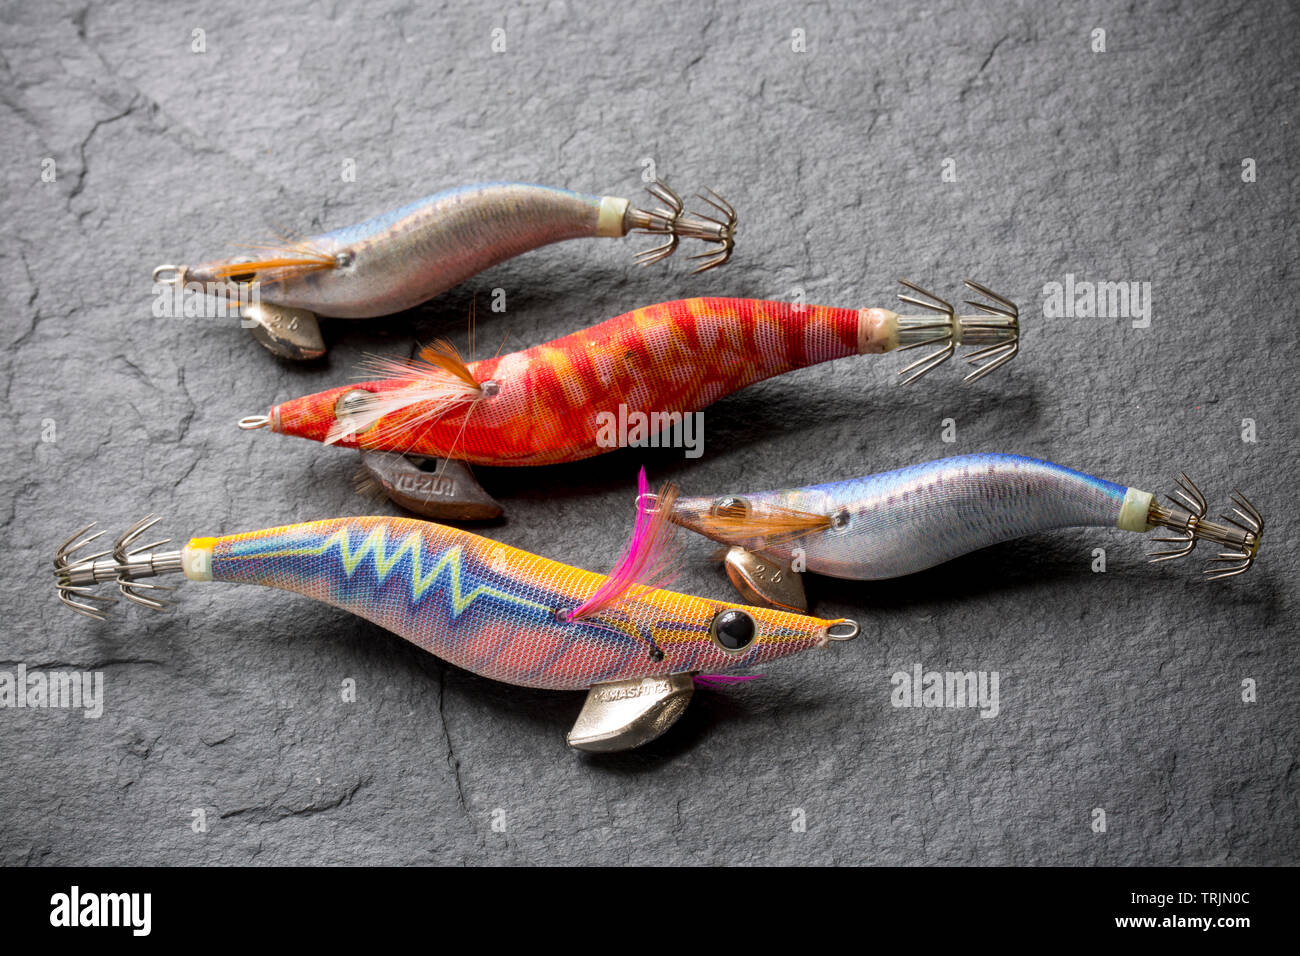 https://c8.alamy.com/comp/TRJN0C/a-selection-of-squid-jigs-or-lures-squid-fishing-has-become-popular-in-the-uk-both-for-commercial-fishermen-as-well-as-recreational-anglers-the-lur-TRJN0C.jpg